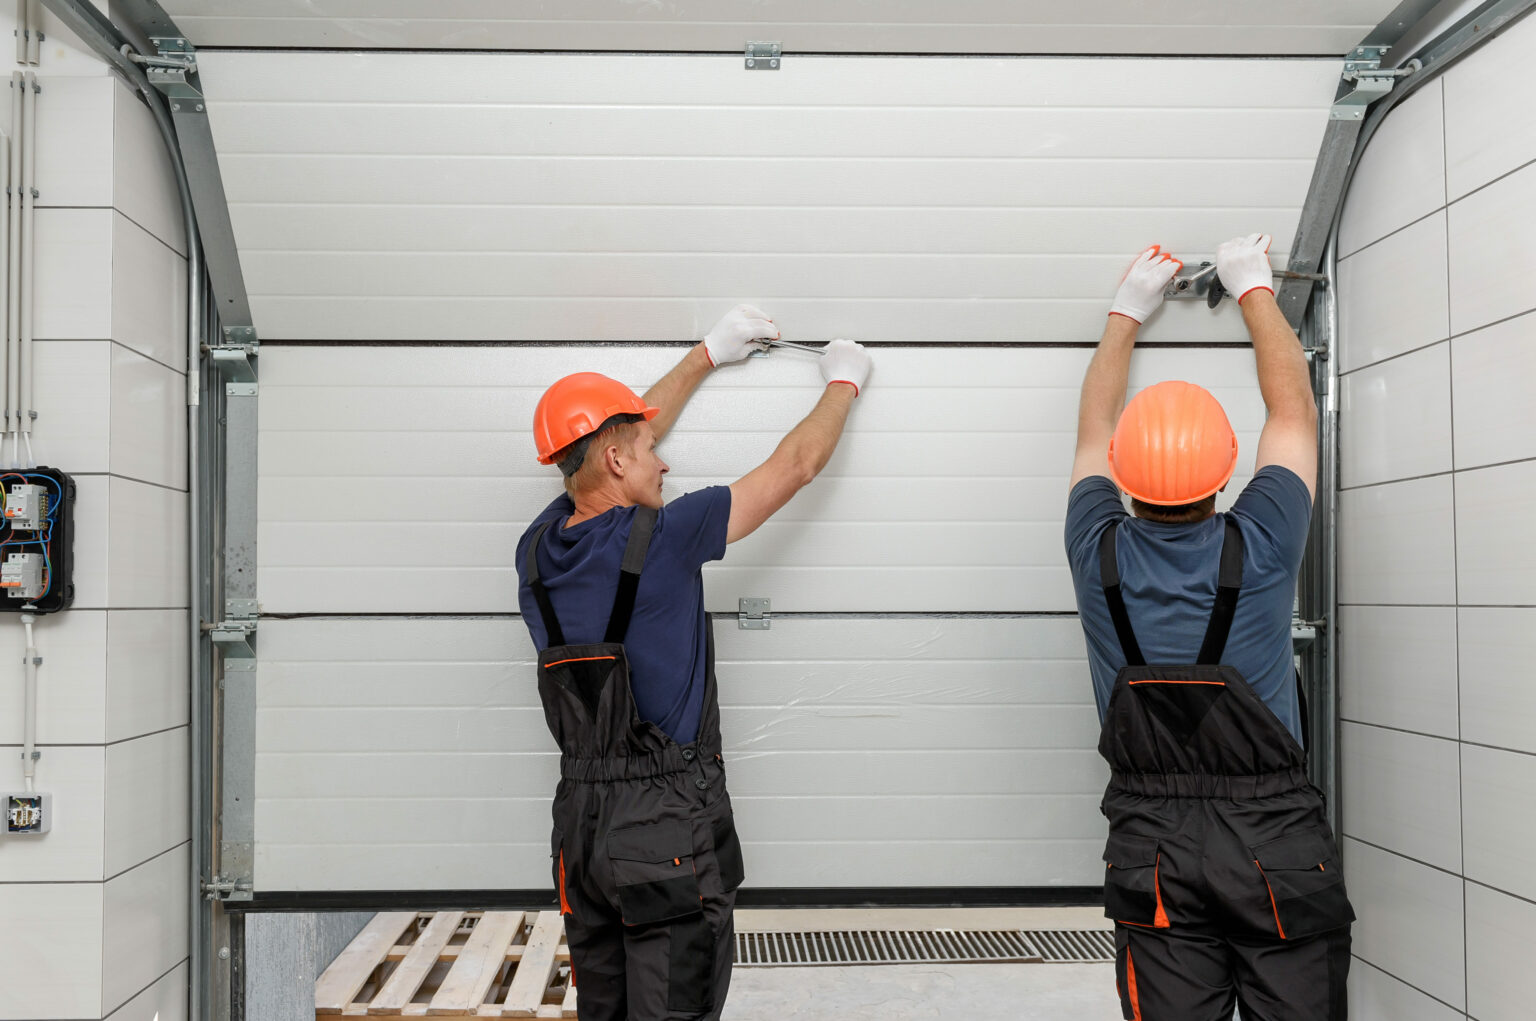 How to Reset a Garage Door After a Power Outage